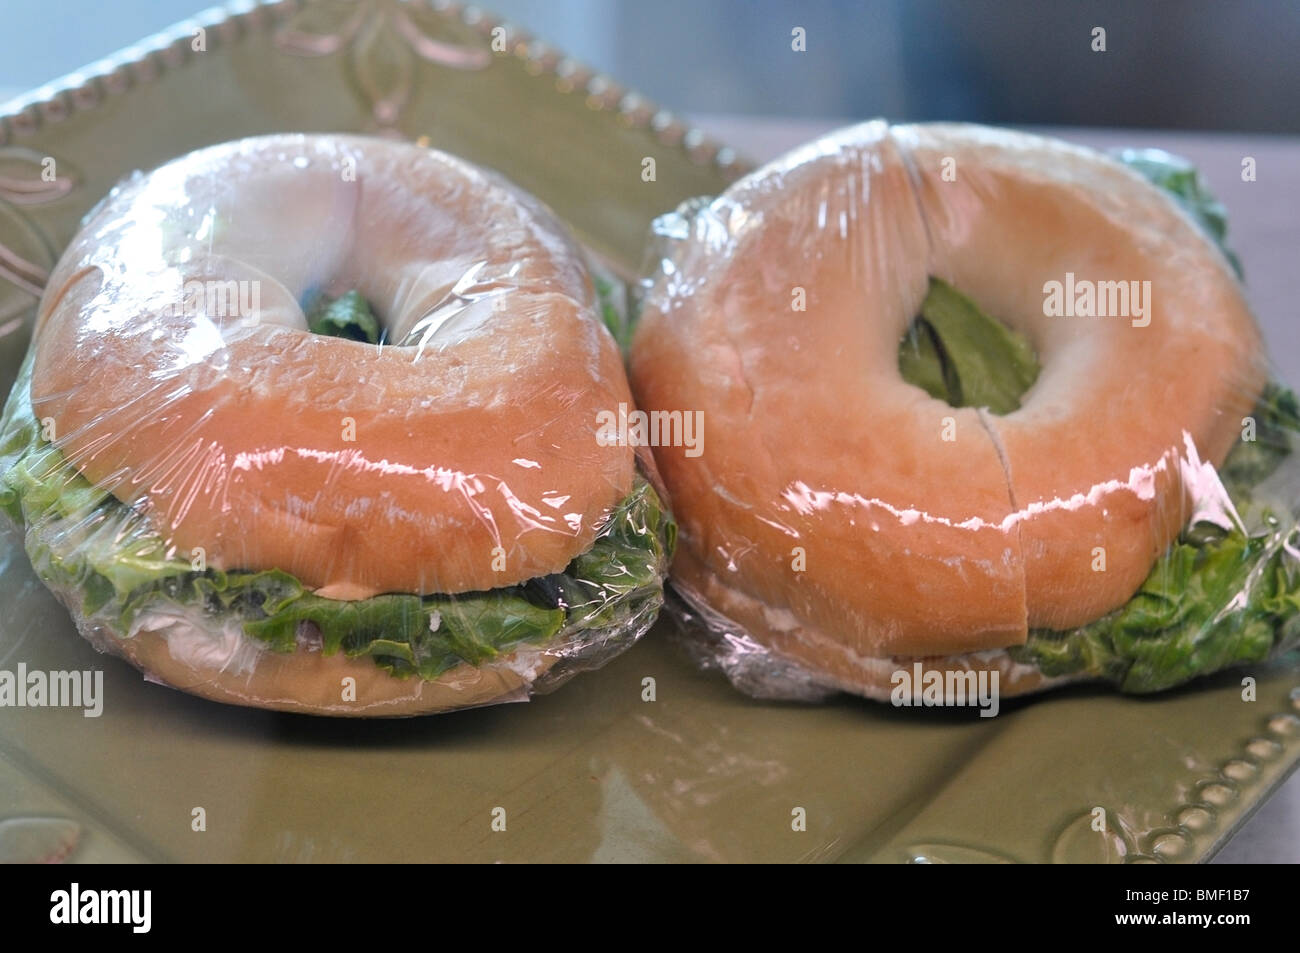 Bagel Sandwich, Bagel Sandwiches with Salmon Spread and Lettuce Stock Photo